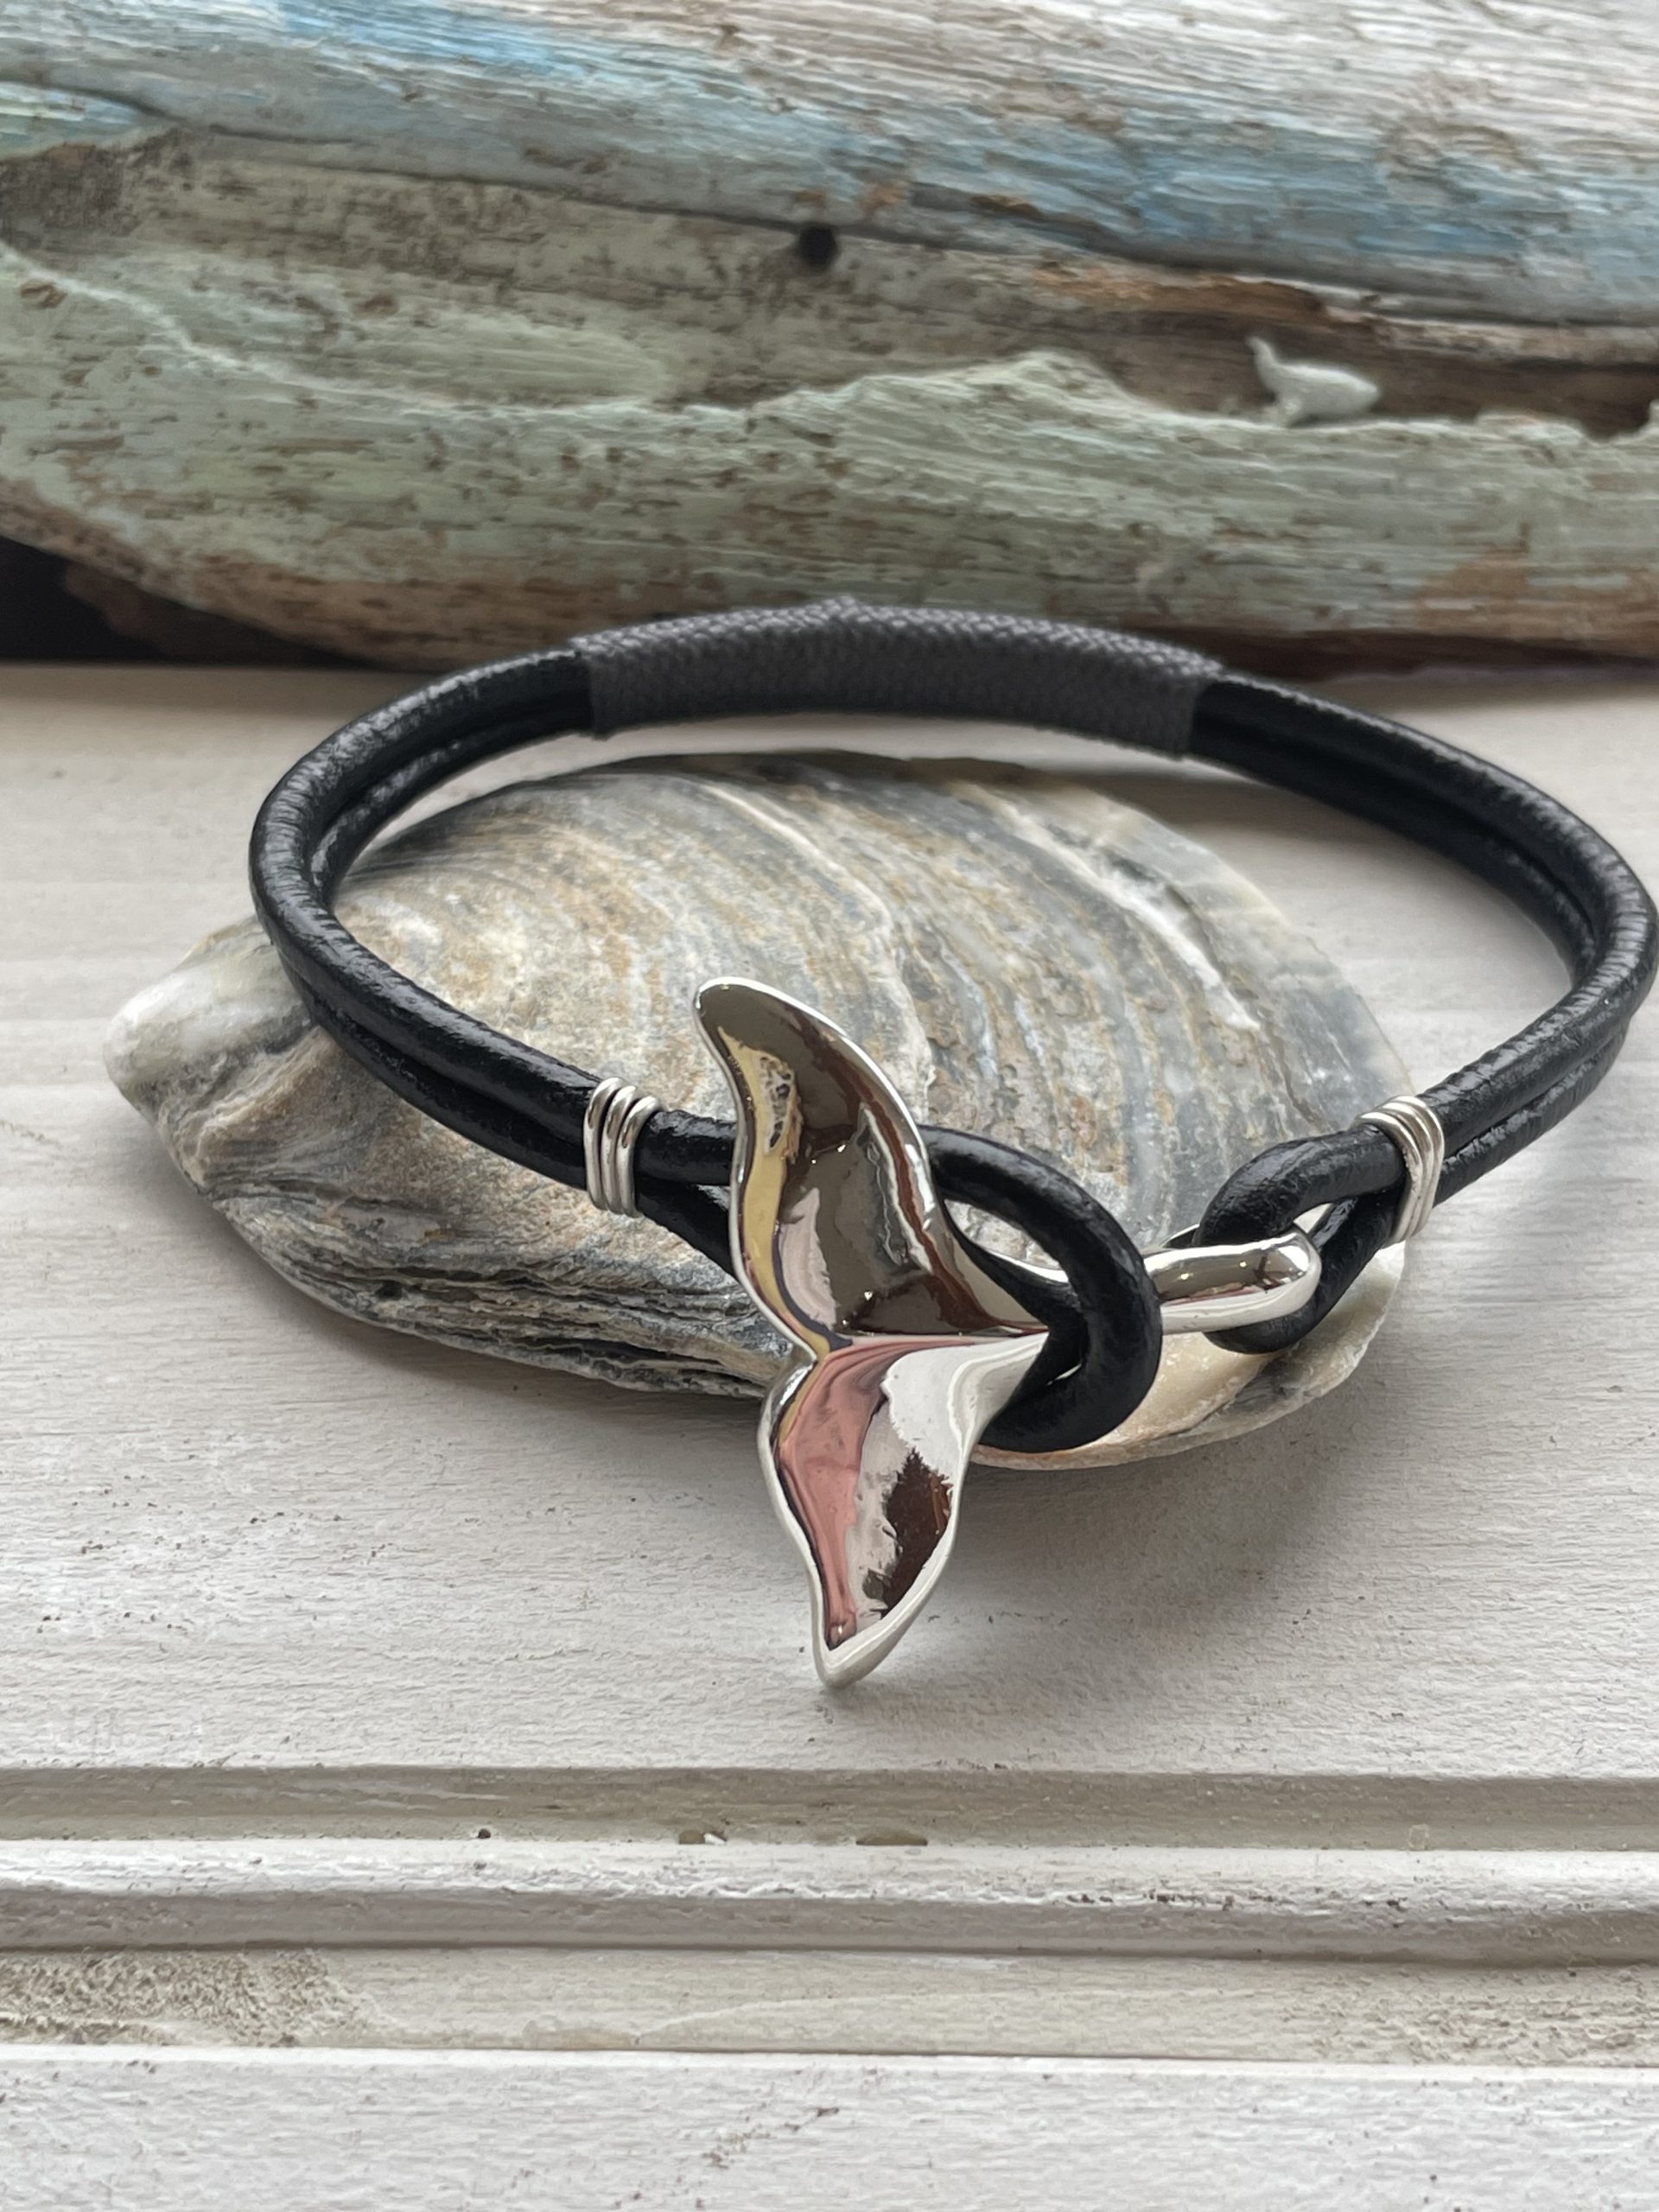 Whale Tail Bracelet With Leather